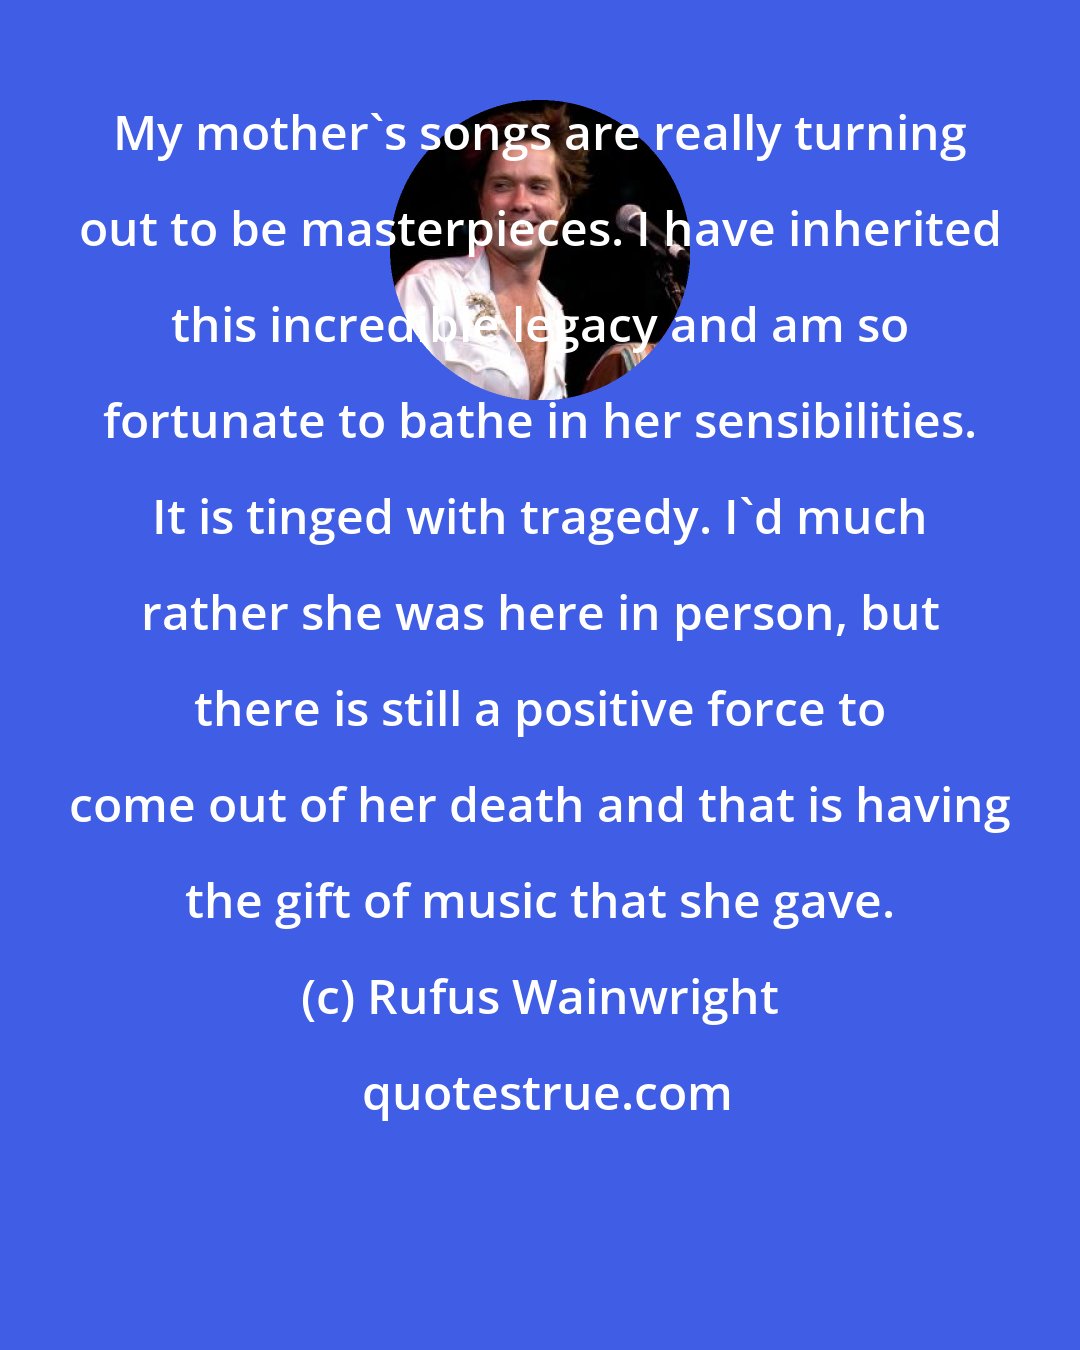 Rufus Wainwright: My mother's songs are really turning out to be masterpieces. I have inherited this incredible legacy and am so fortunate to bathe in her sensibilities. It is tinged with tragedy. I'd much rather she was here in person, but there is still a positive force to come out of her death and that is having the gift of music that she gave.